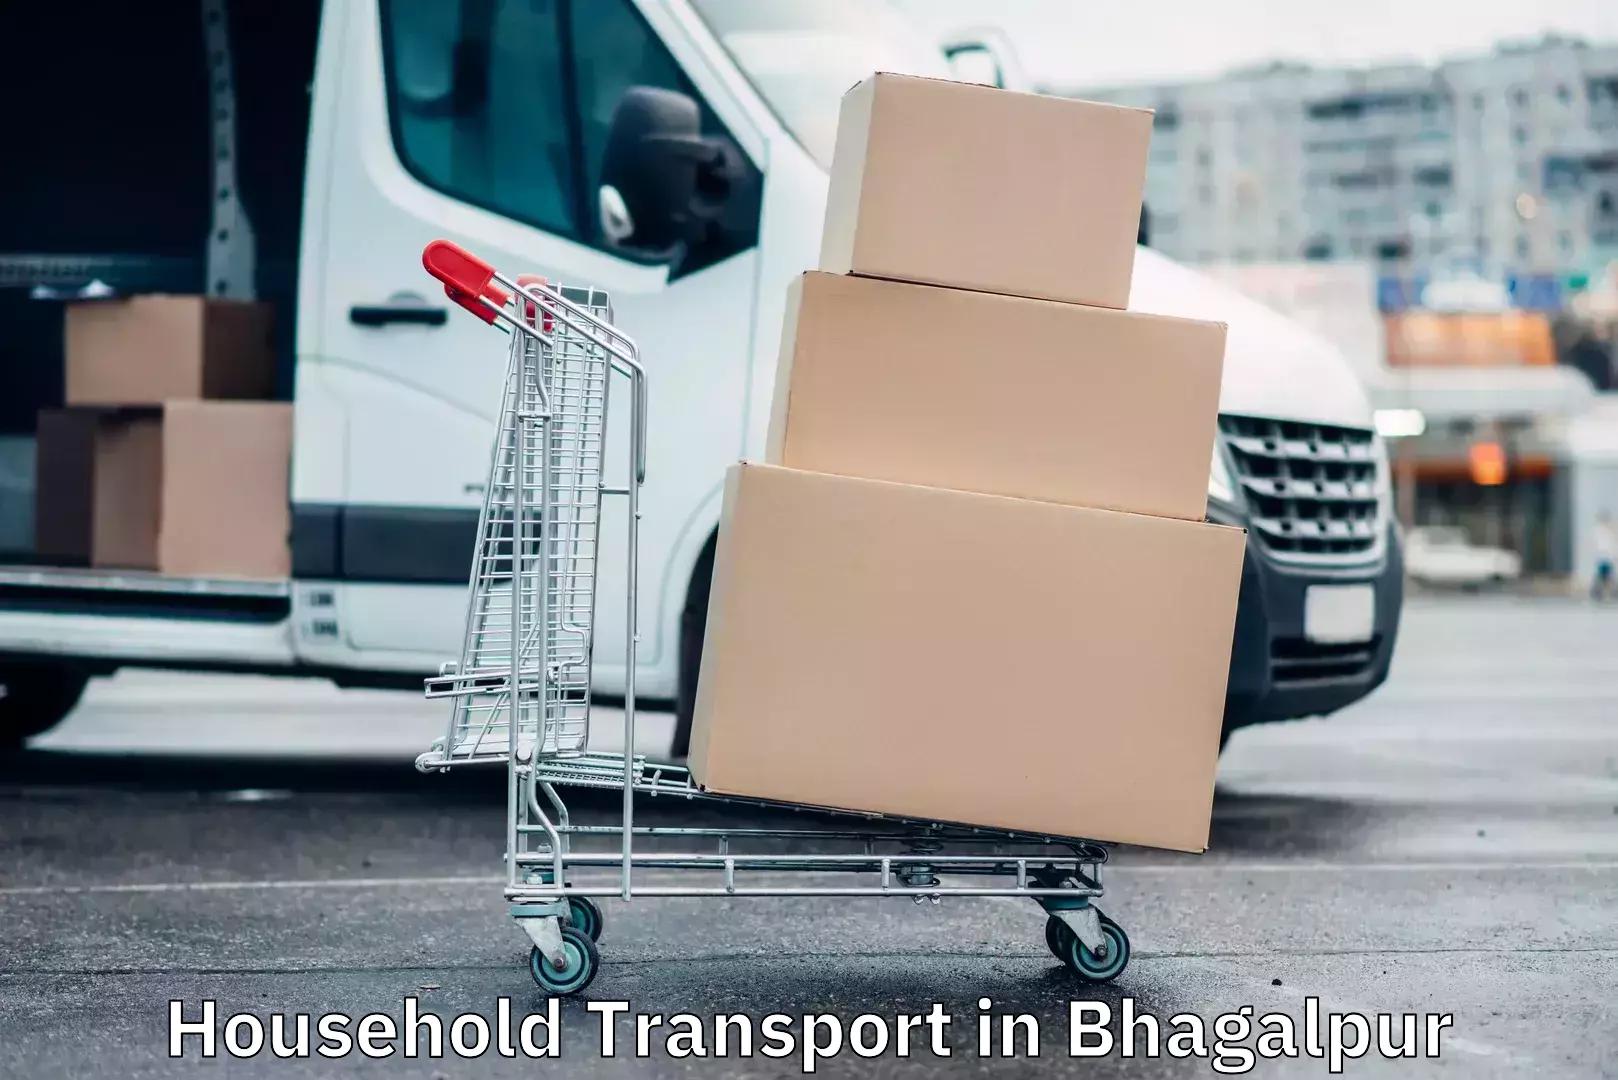 Budget-friendly movers in Bhagalpur